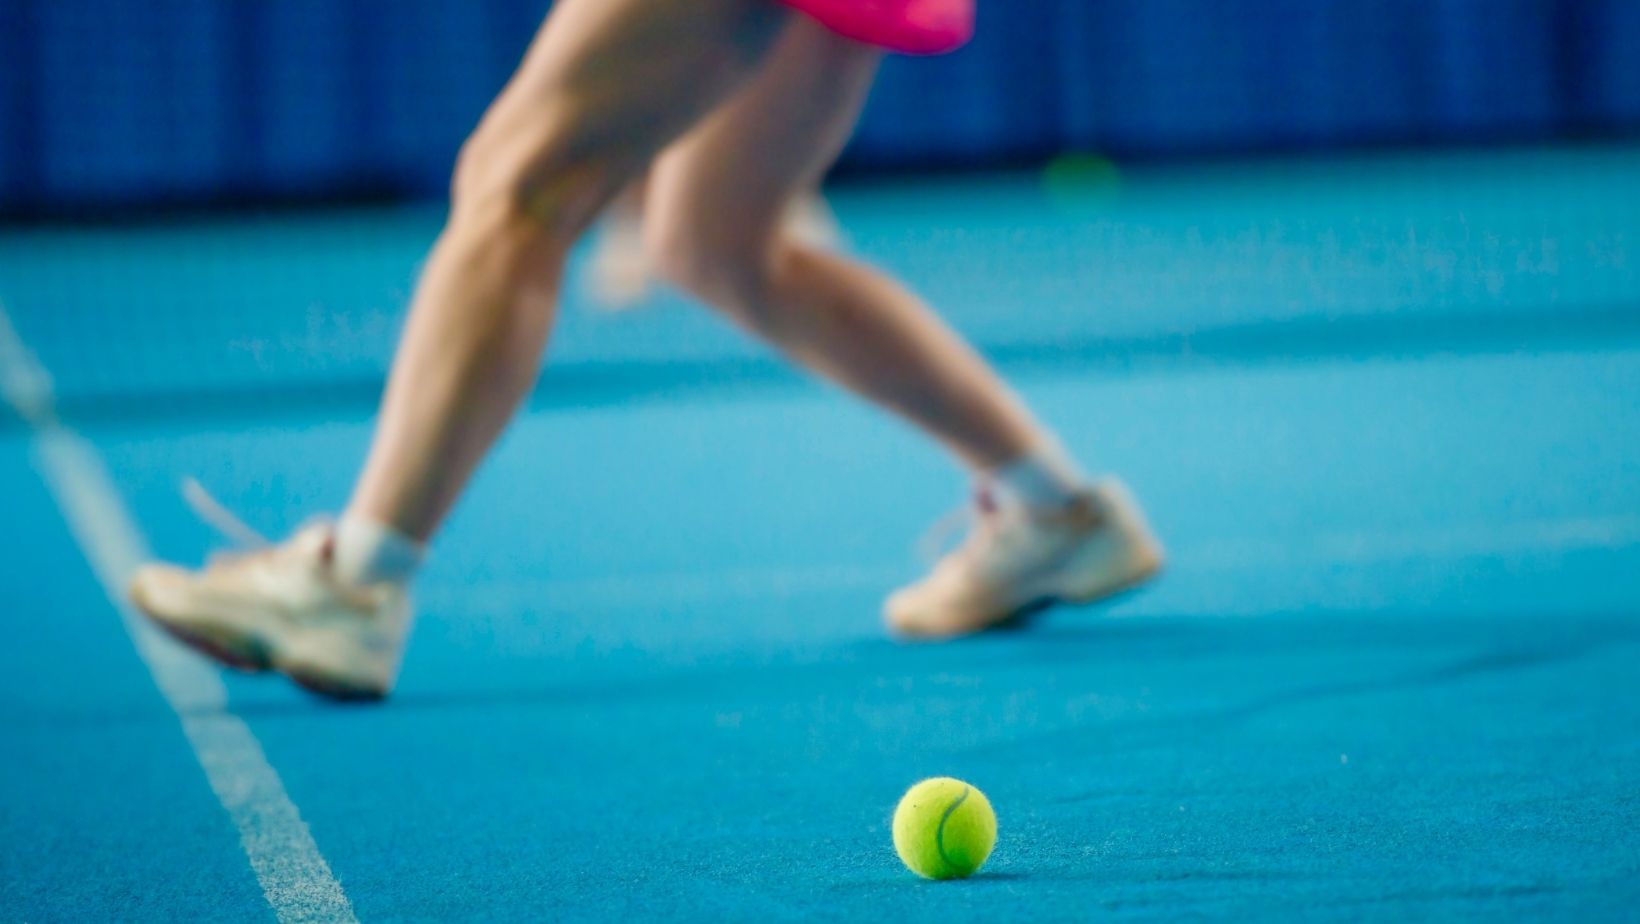 What Kind Of Health Supplements Are Good For Female Tennis Players?